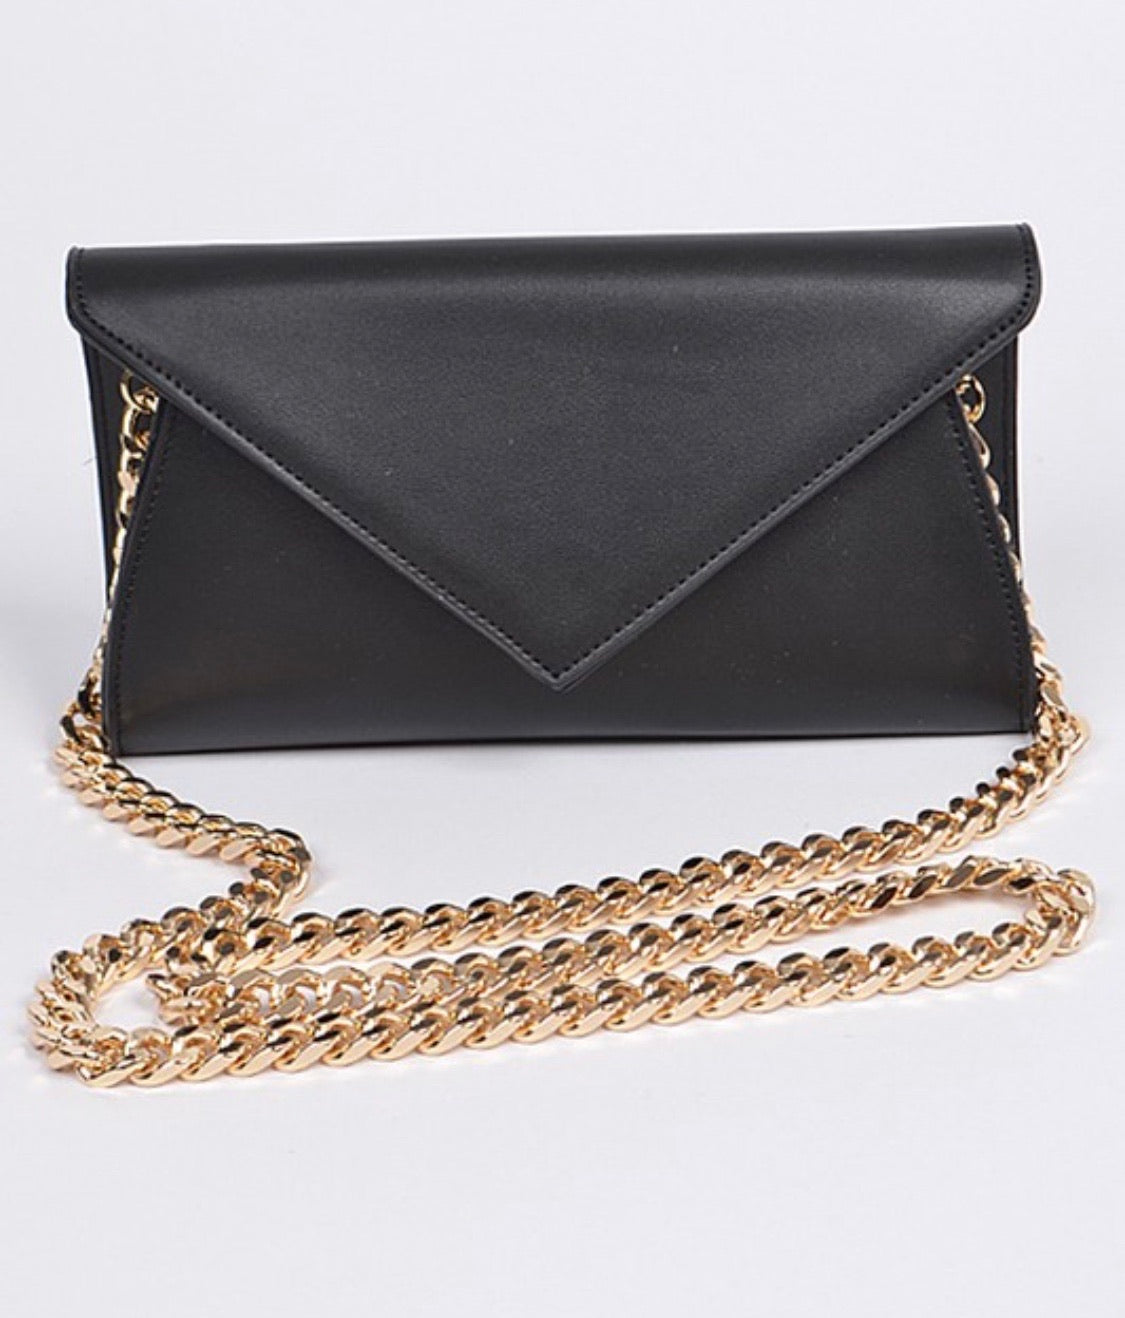 Ameila PU leather Shoulder Chain strapped clutch